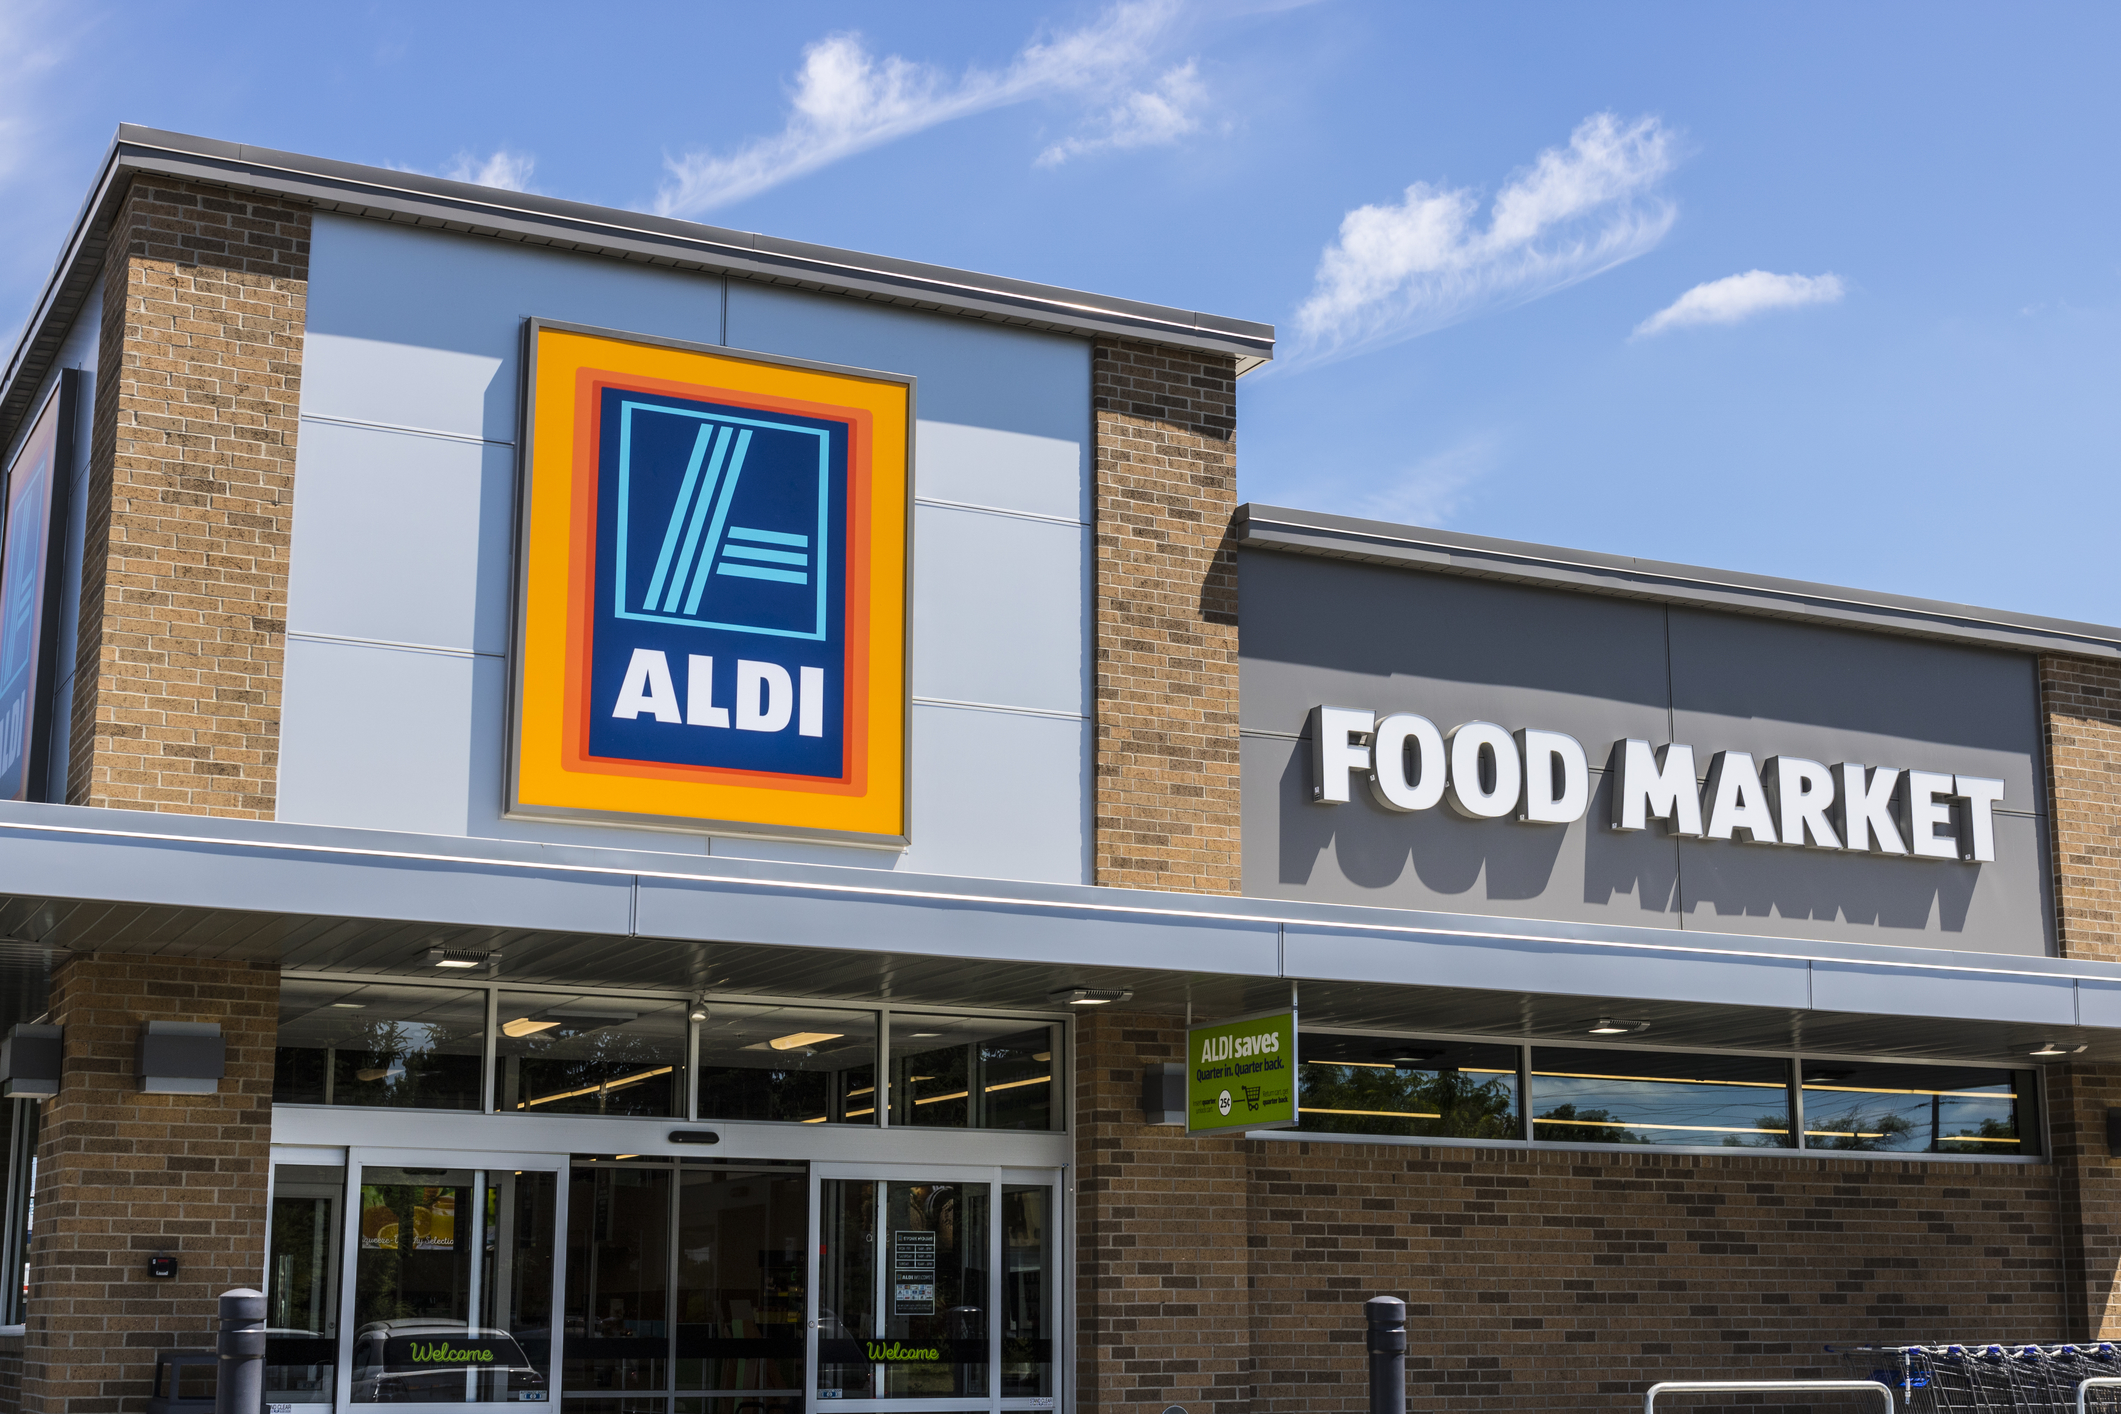 Aldi grocery delivery: Enjoy free delivery on first 3 orders of $35+